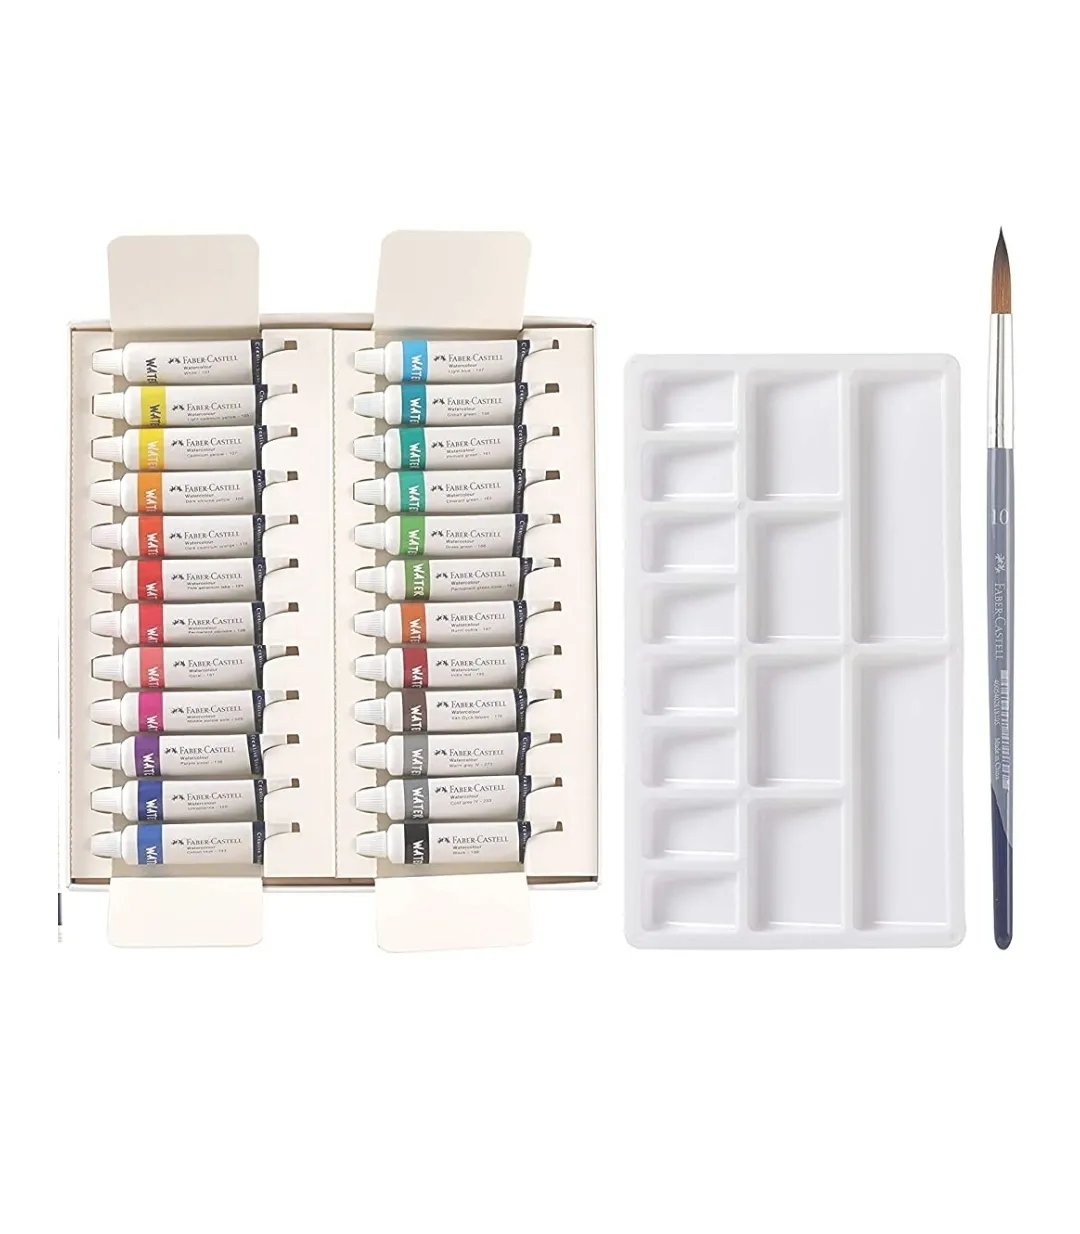 Faber Castell Creative Studio Water Colour 9ml Set of 24 shades With Free Size Brush And Palette Plate